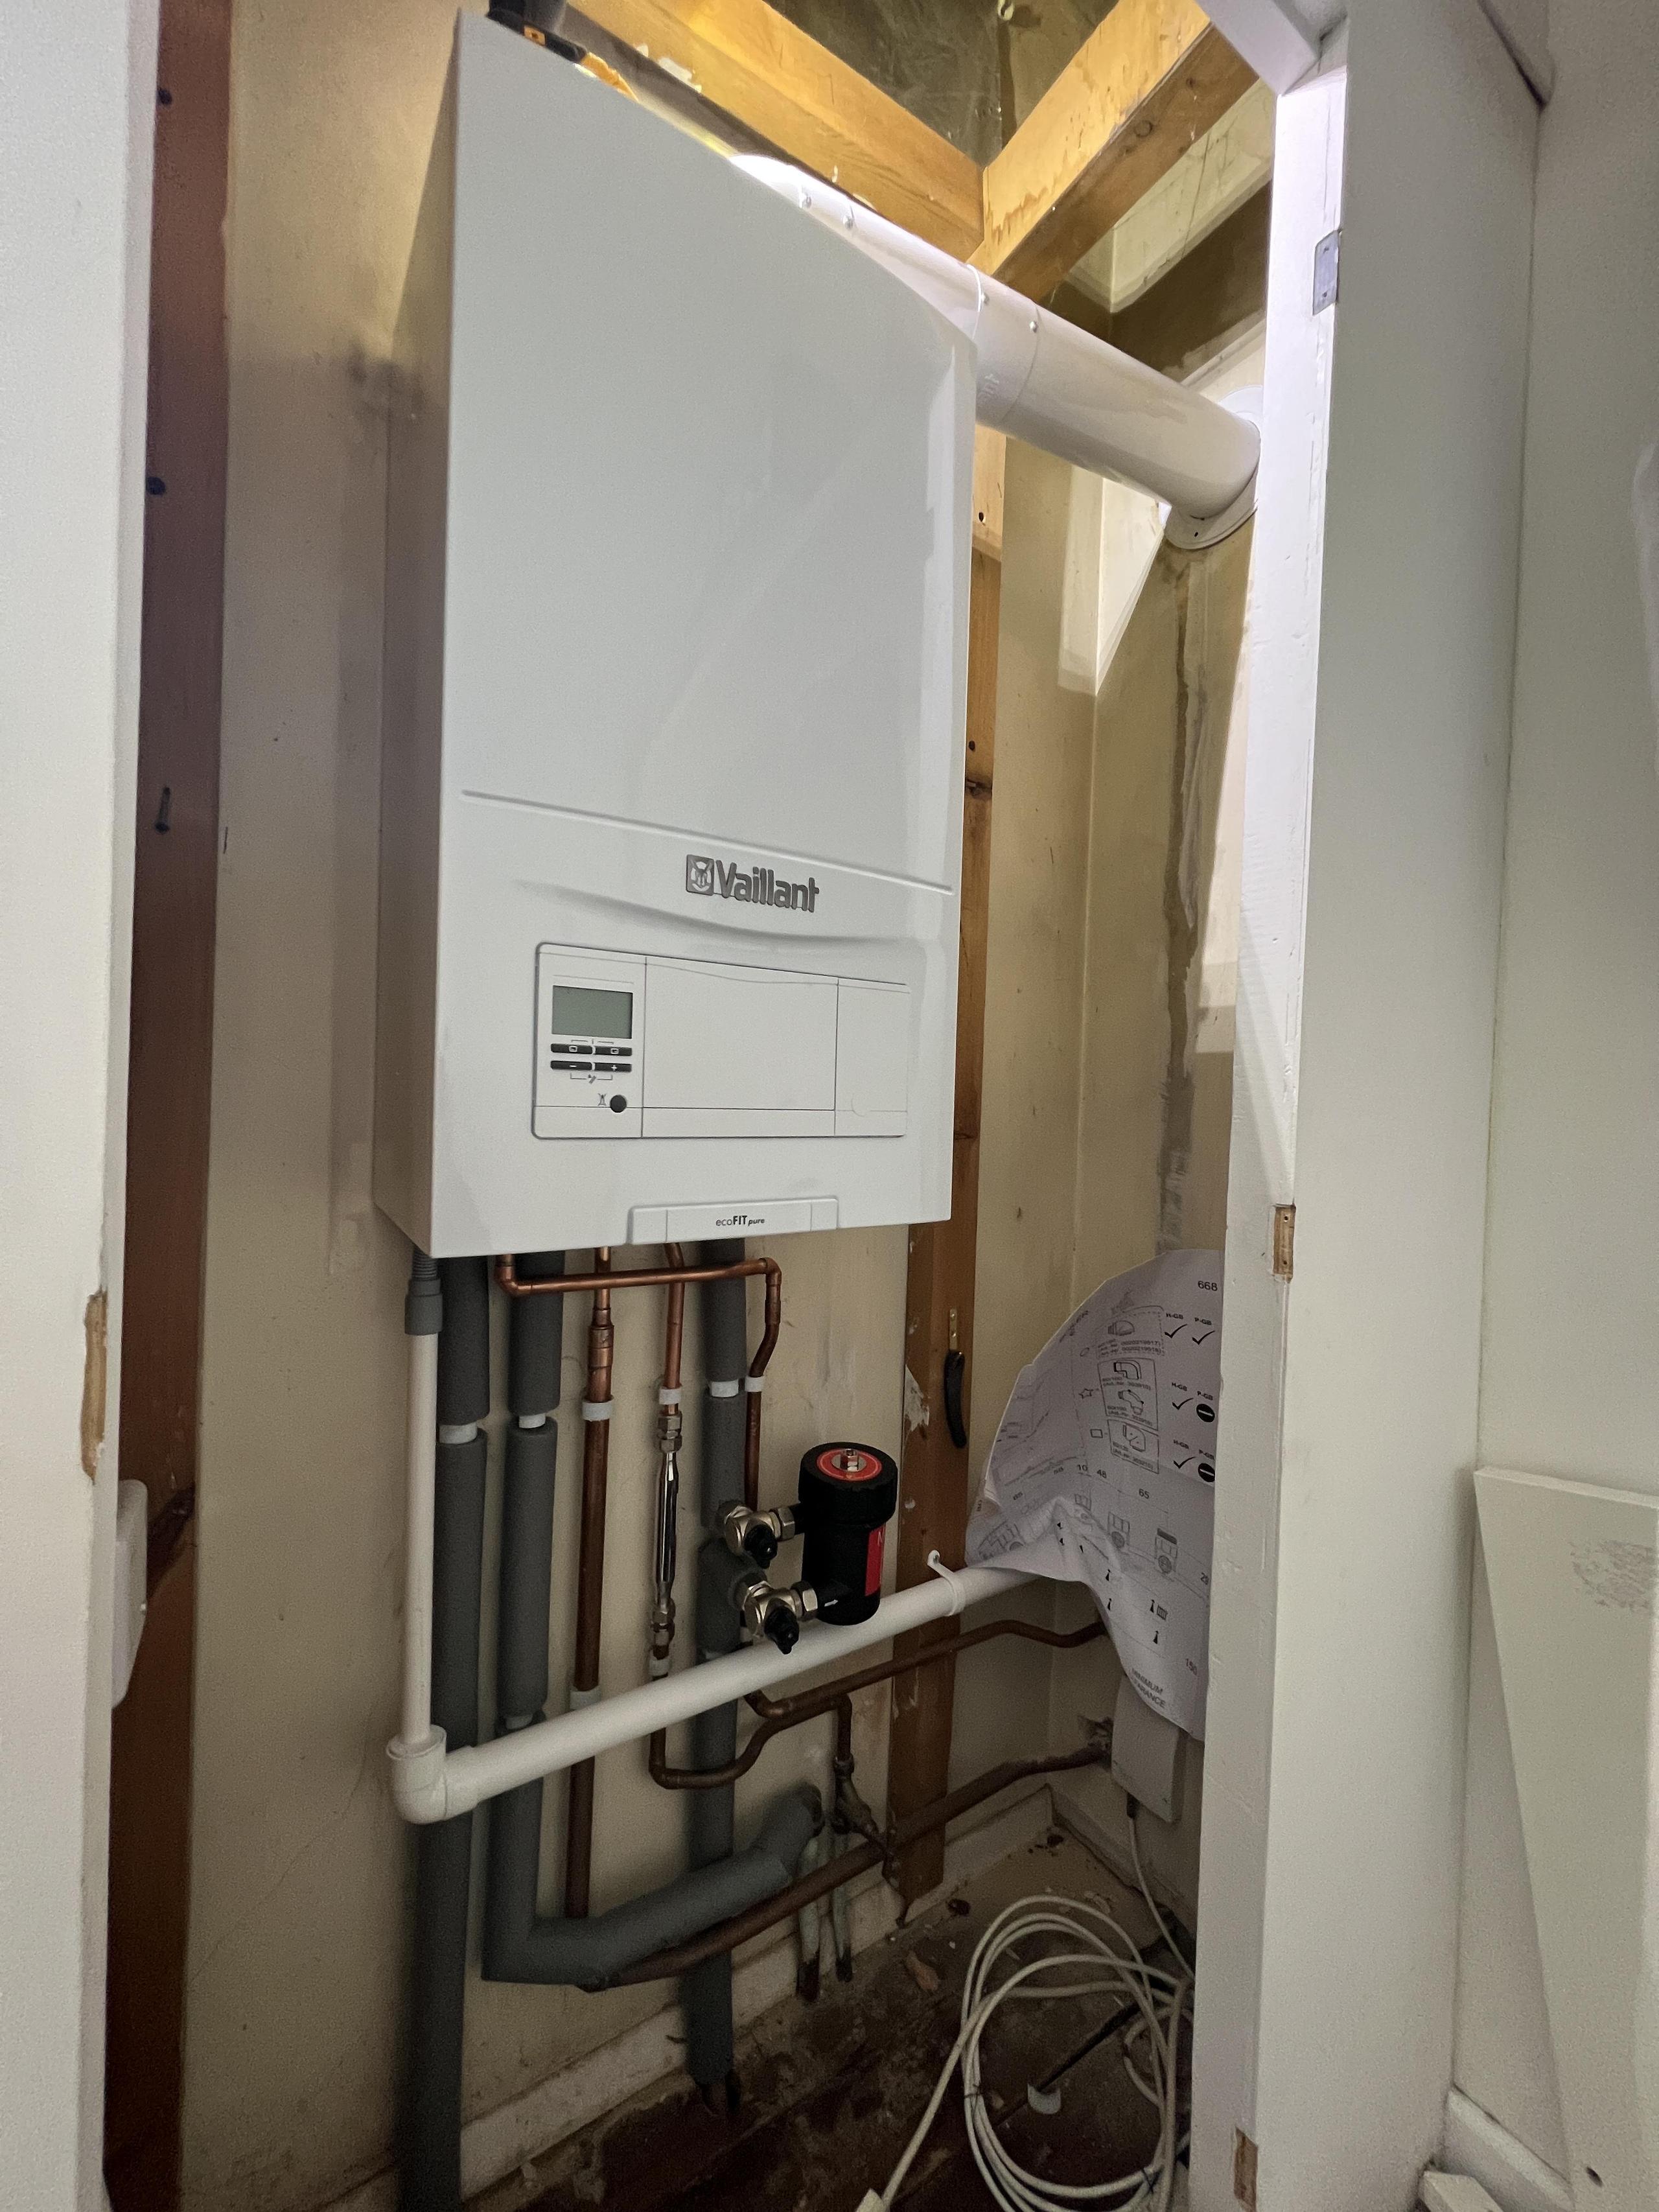 Vaillant Boilers Installed By Daztec